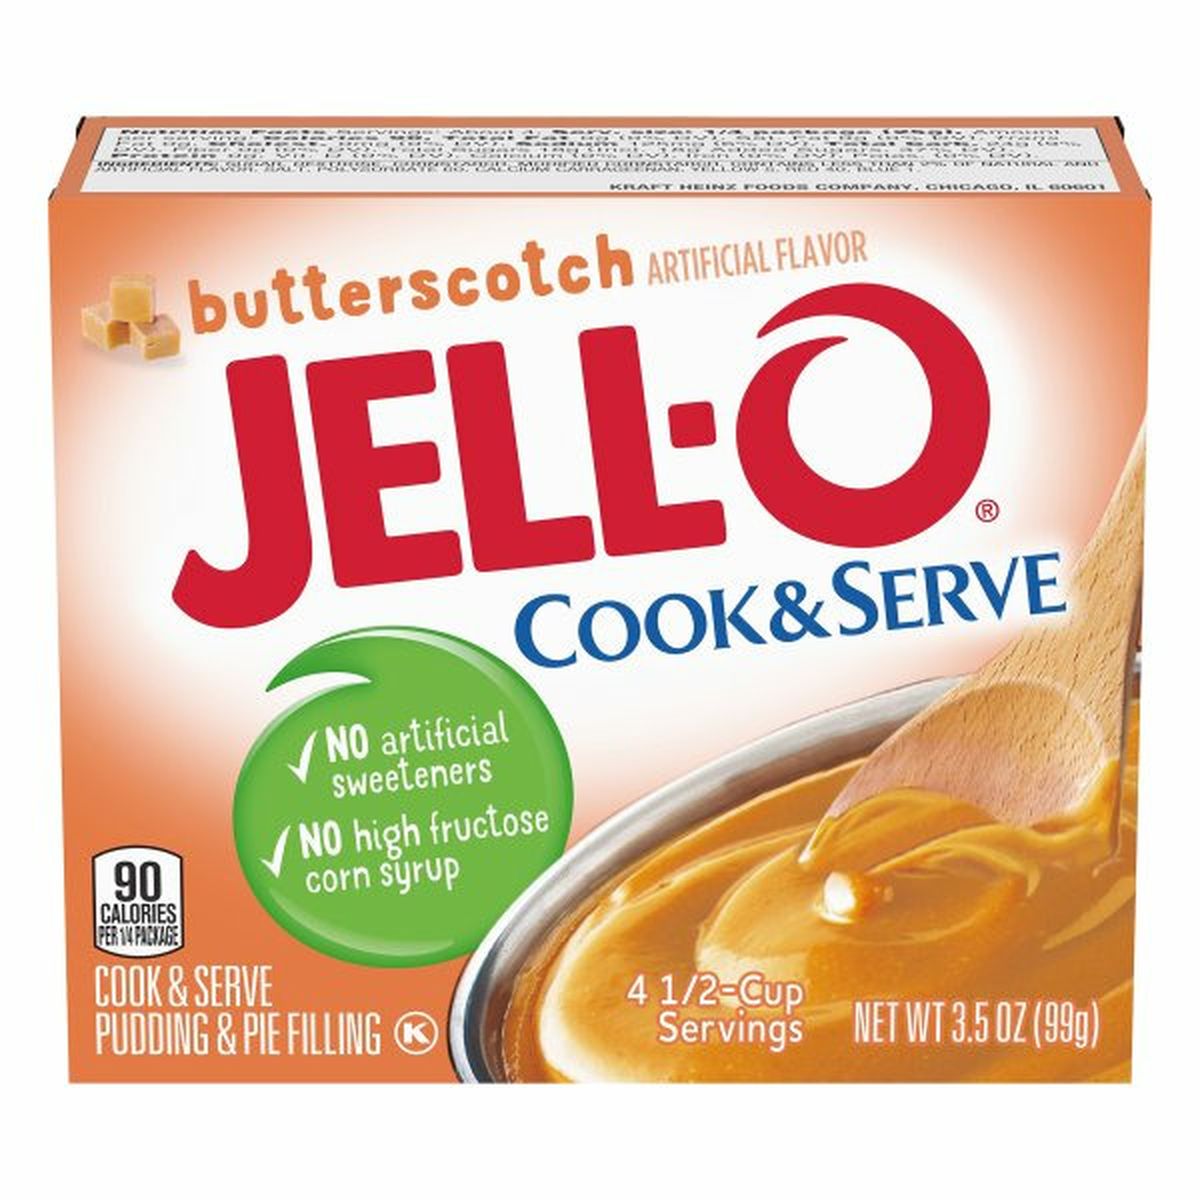 Calories in Jell-O Pudding & Pie Filling, Butterscotch, Cook & Serve